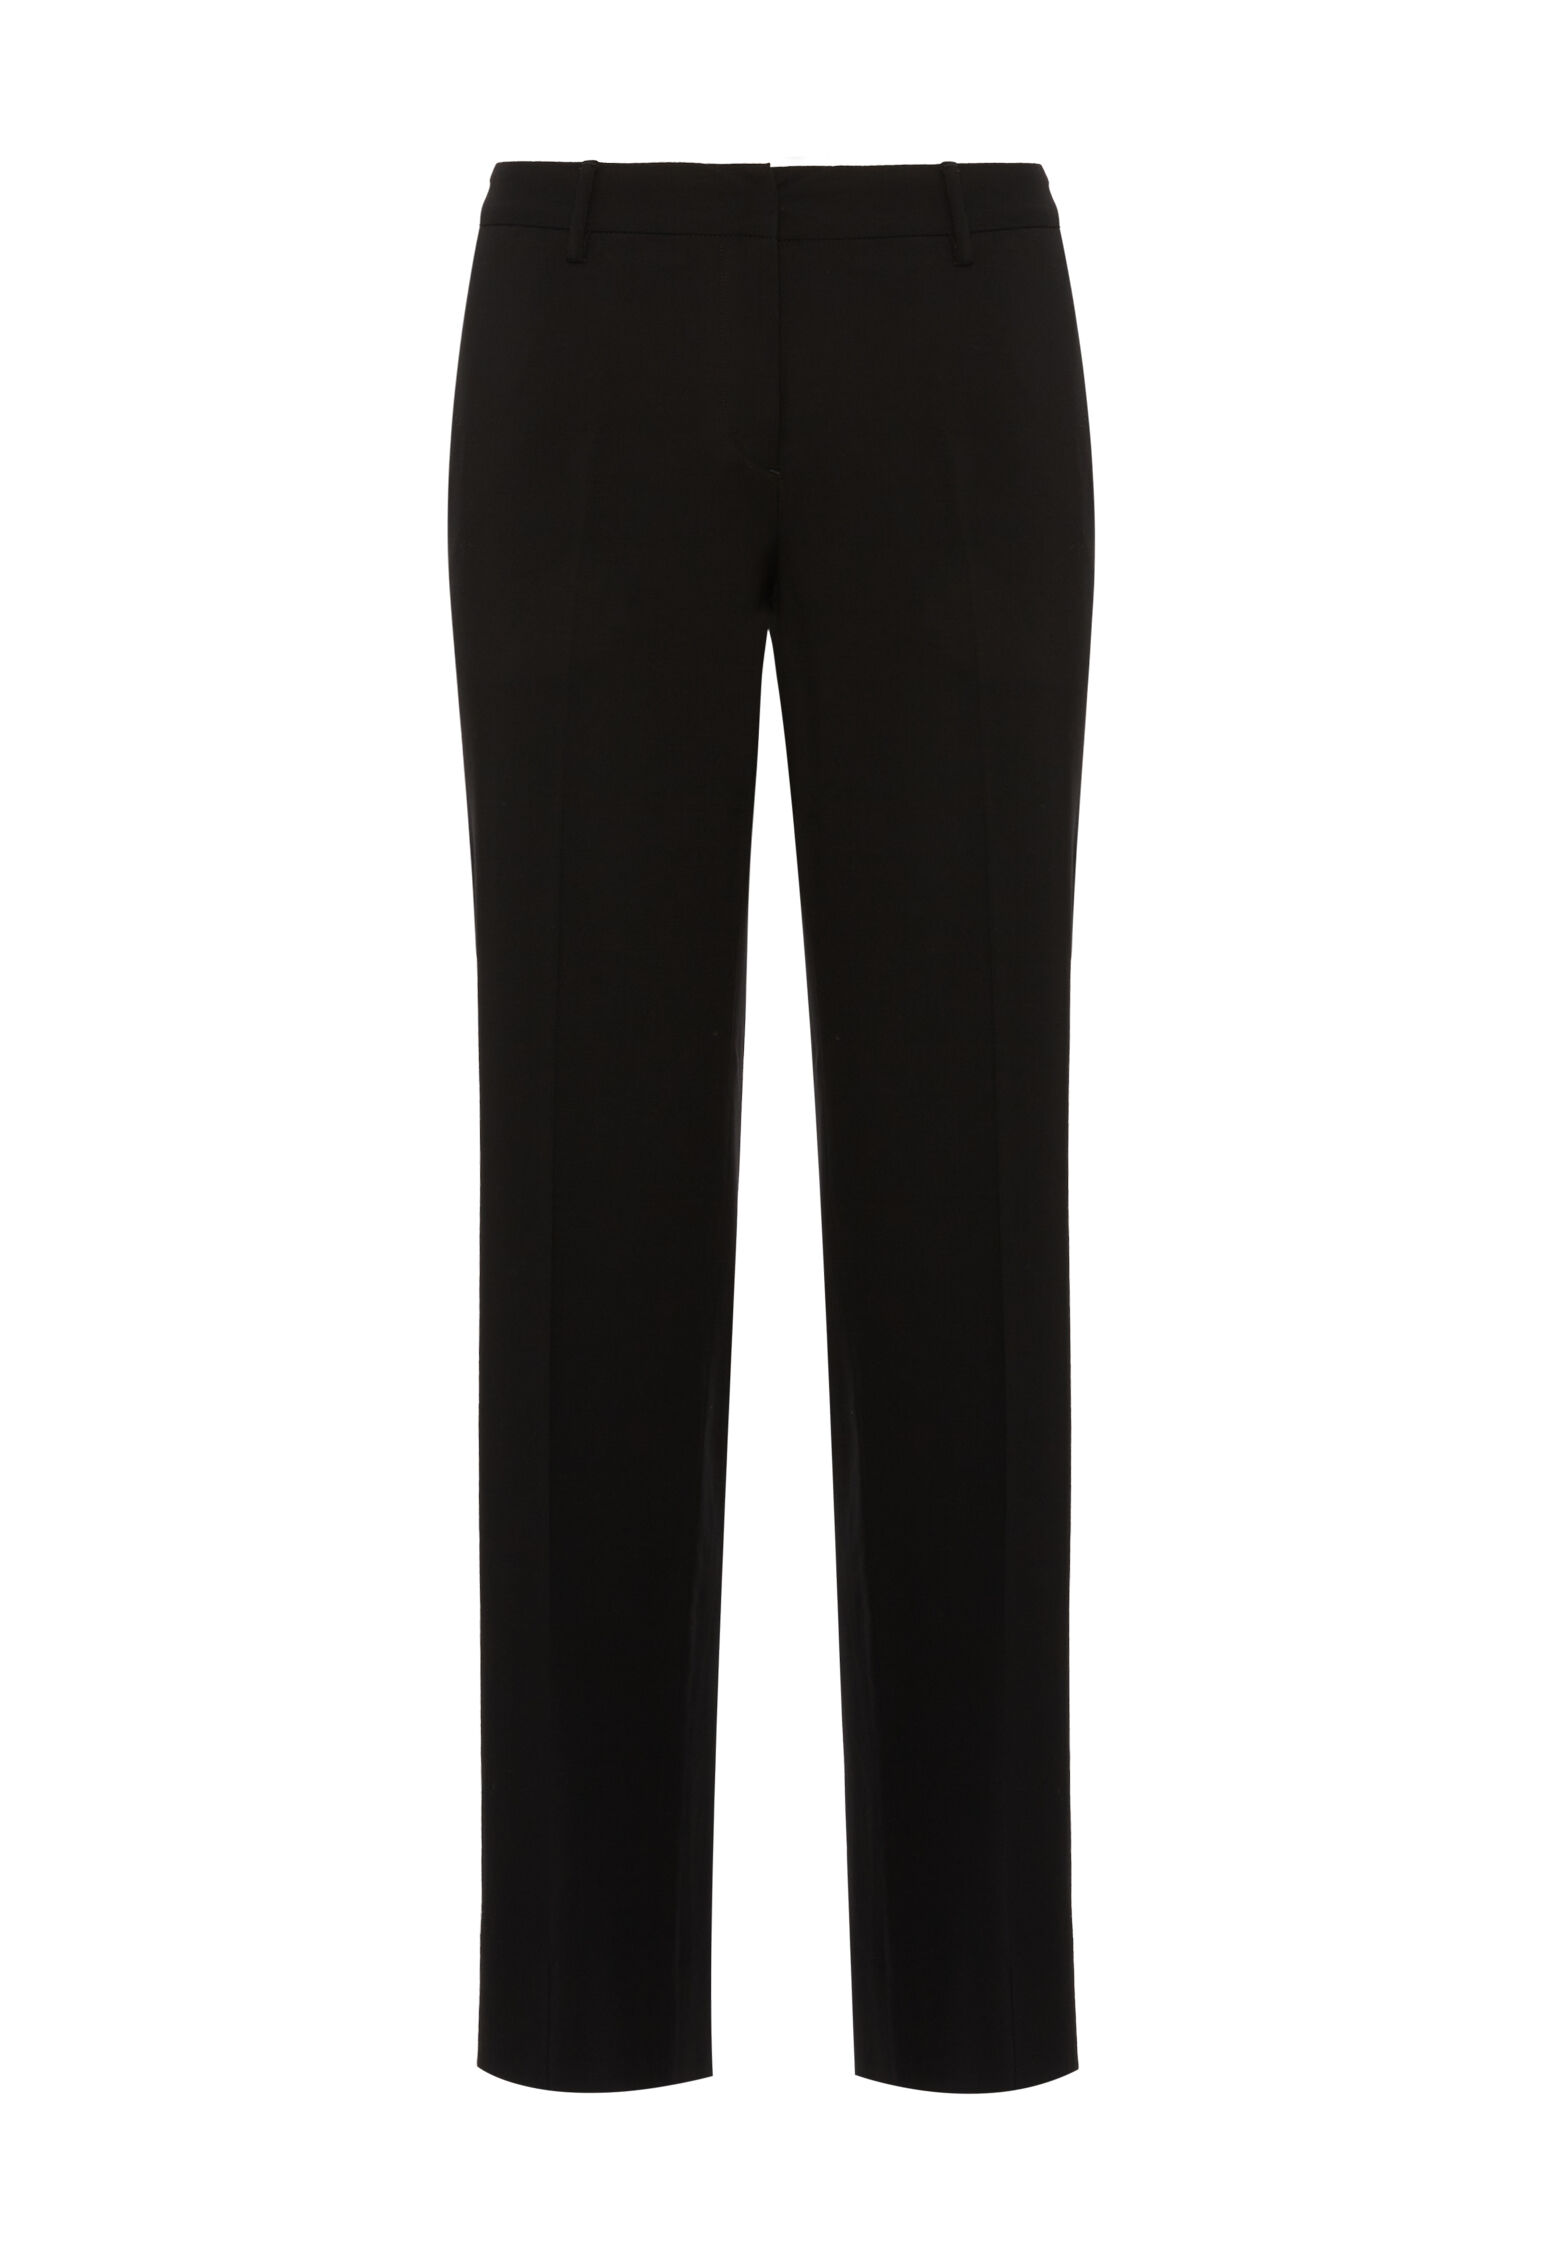 Buy Bamans Work Pants for Women Yoga Dress Pants Straight Leg Stretch Work  Pant with Pockets, Black, Small at Amazon.in